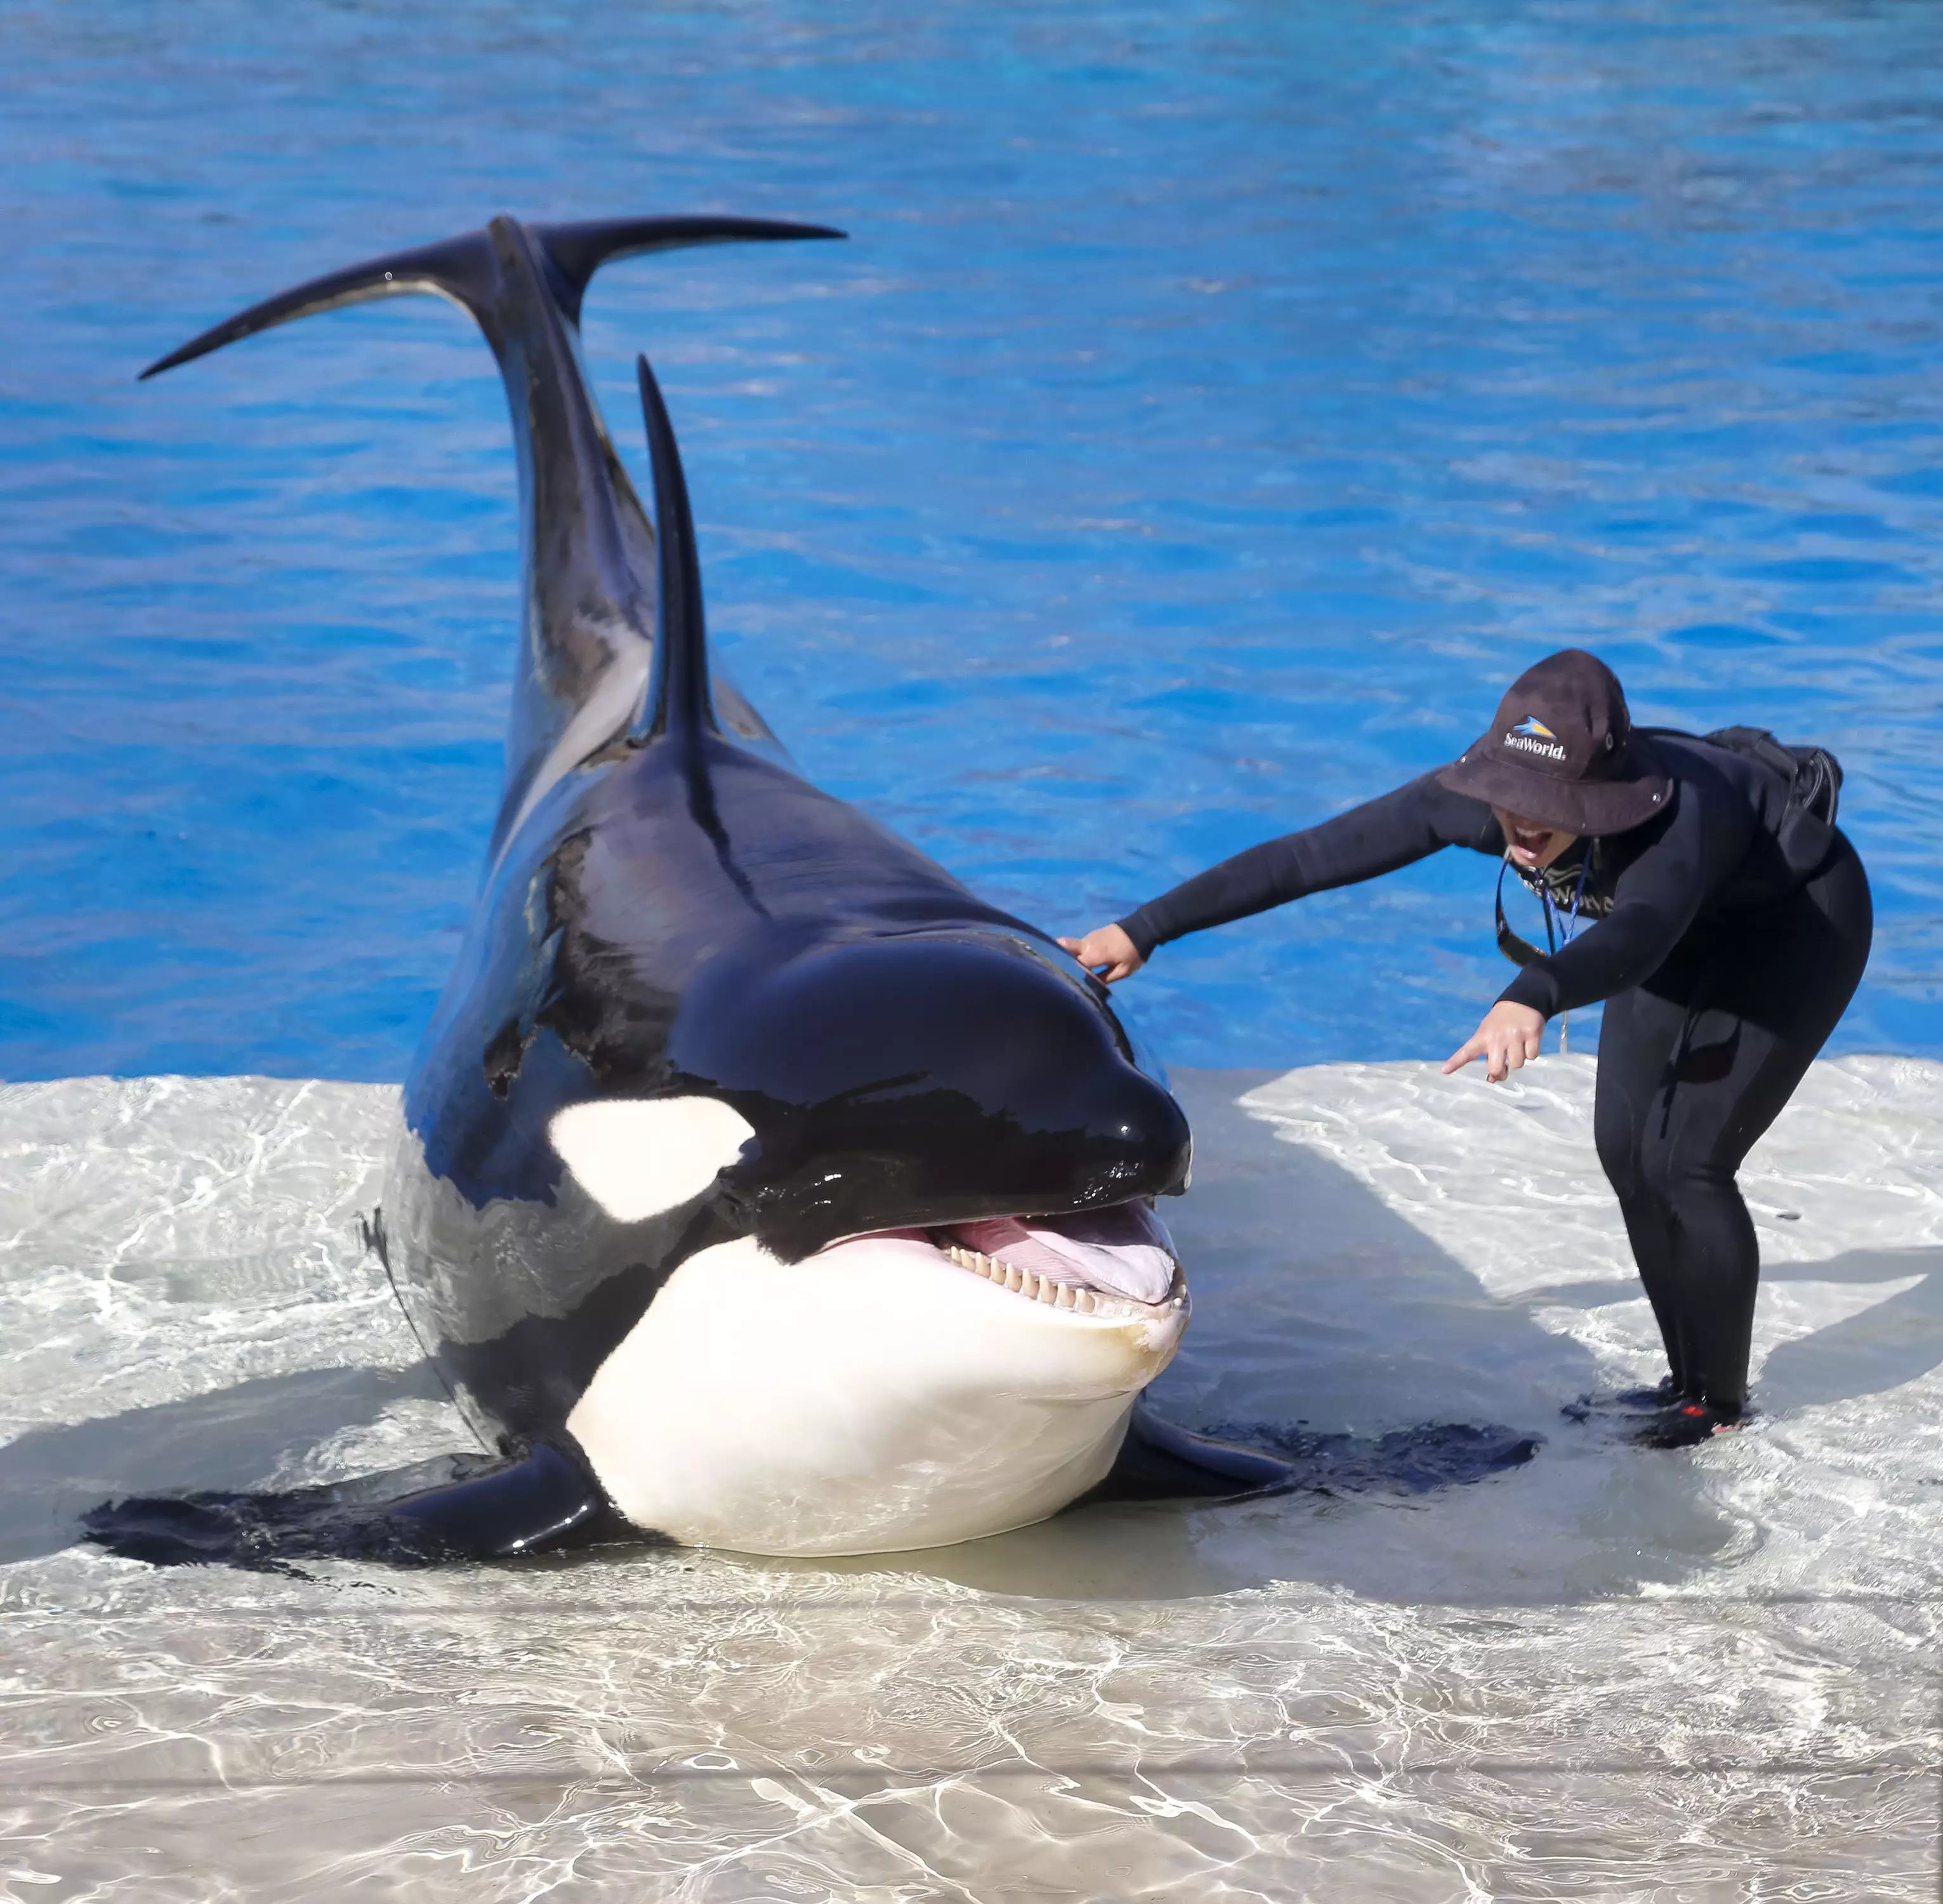 SeaWorld and other marine attractions won't be working commercially with TripAdvisor under their new guidelines